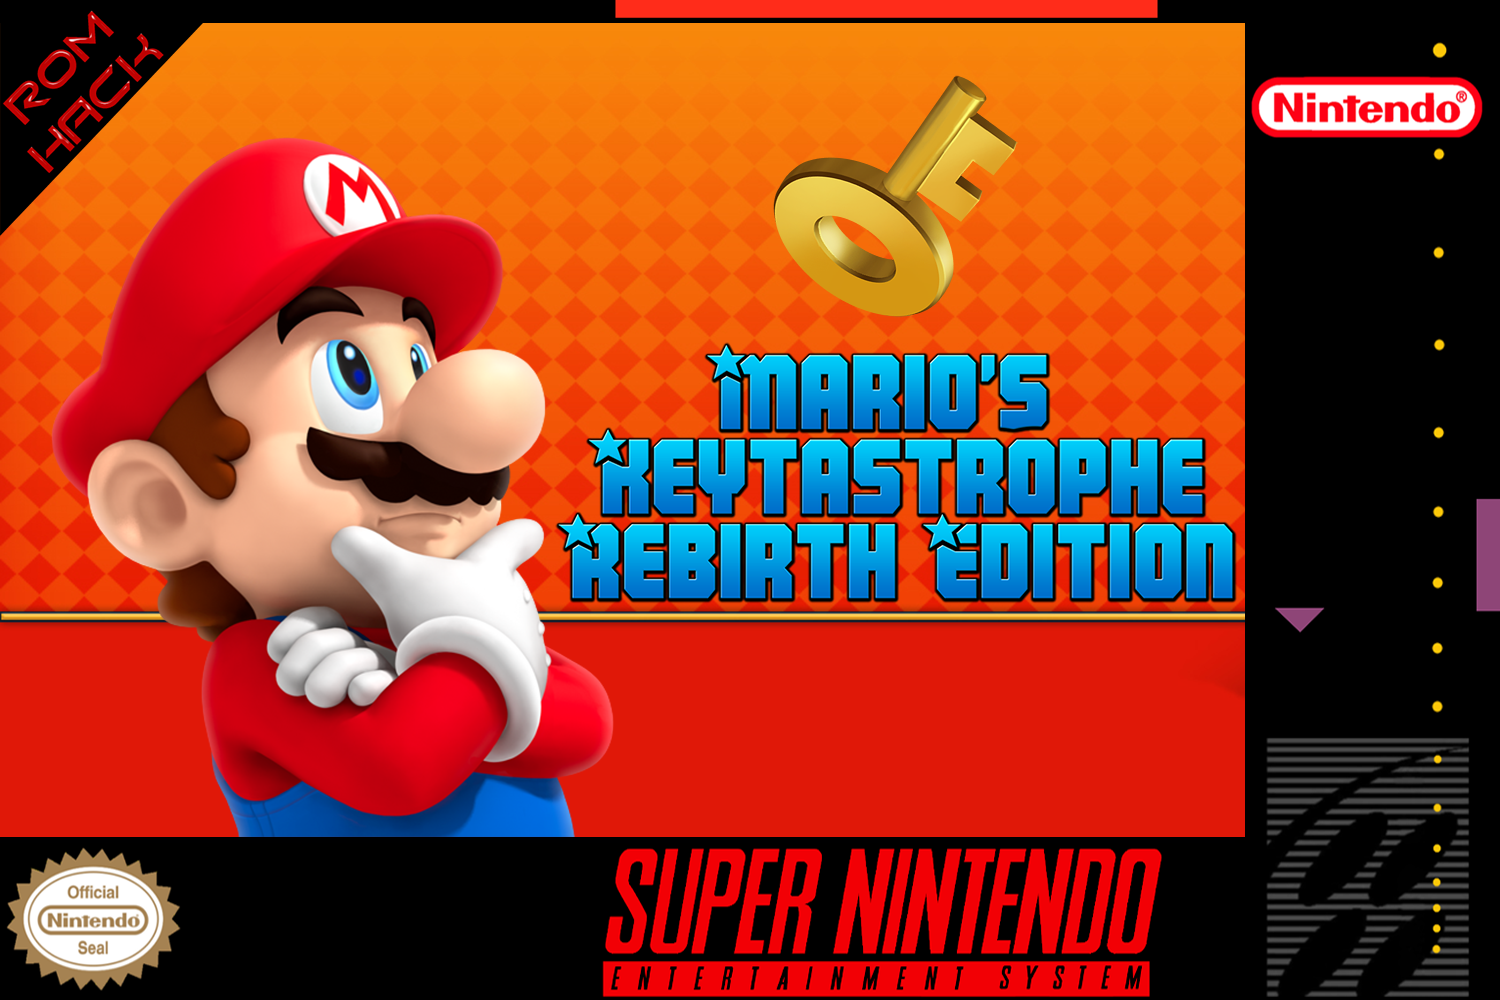 mario-s-keytastrophe-rebirth-edition-images-launchbox-games-database